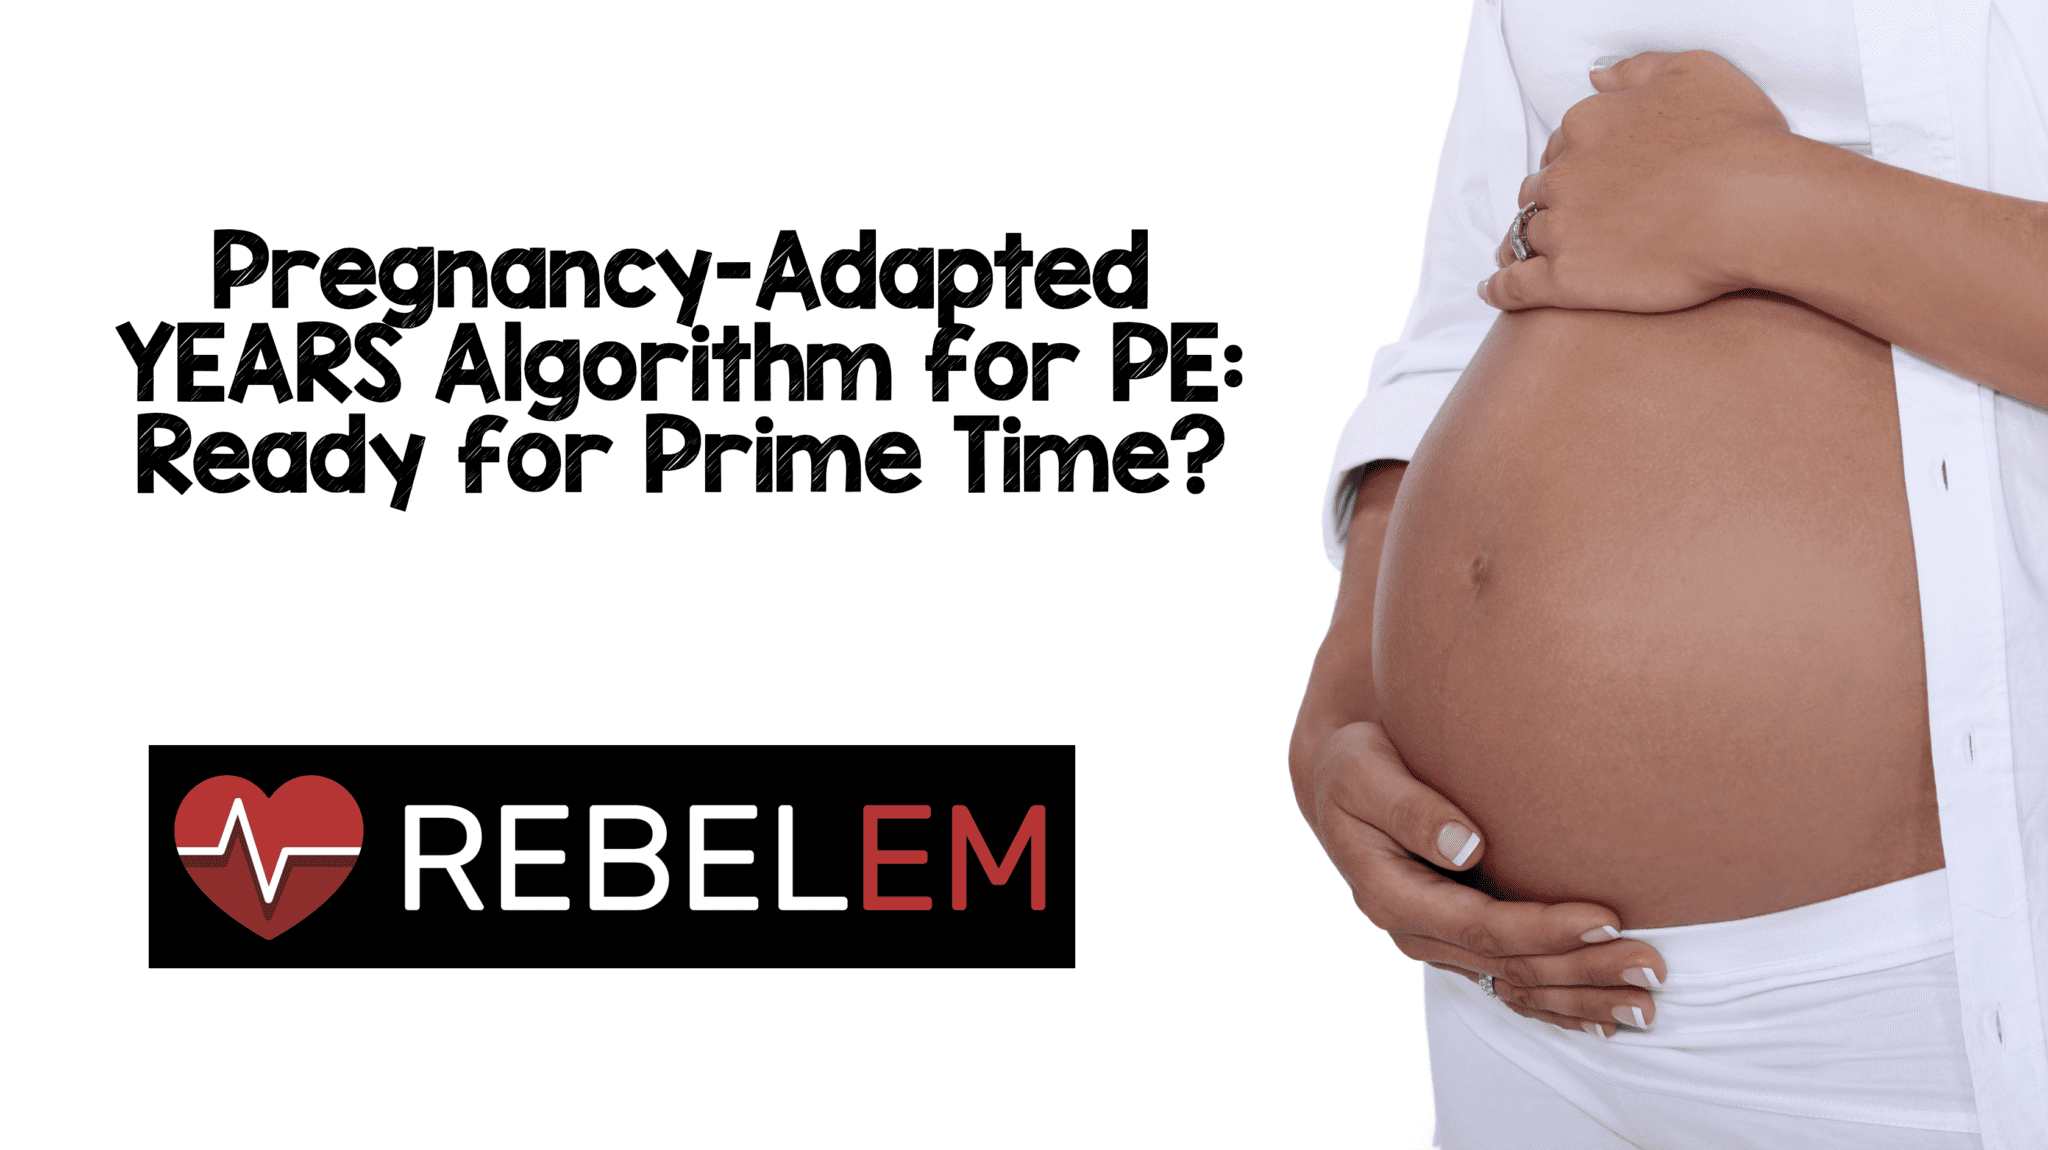 Pragmatic Evaluation of an Algorithm Using D-Dimer Adjusted to